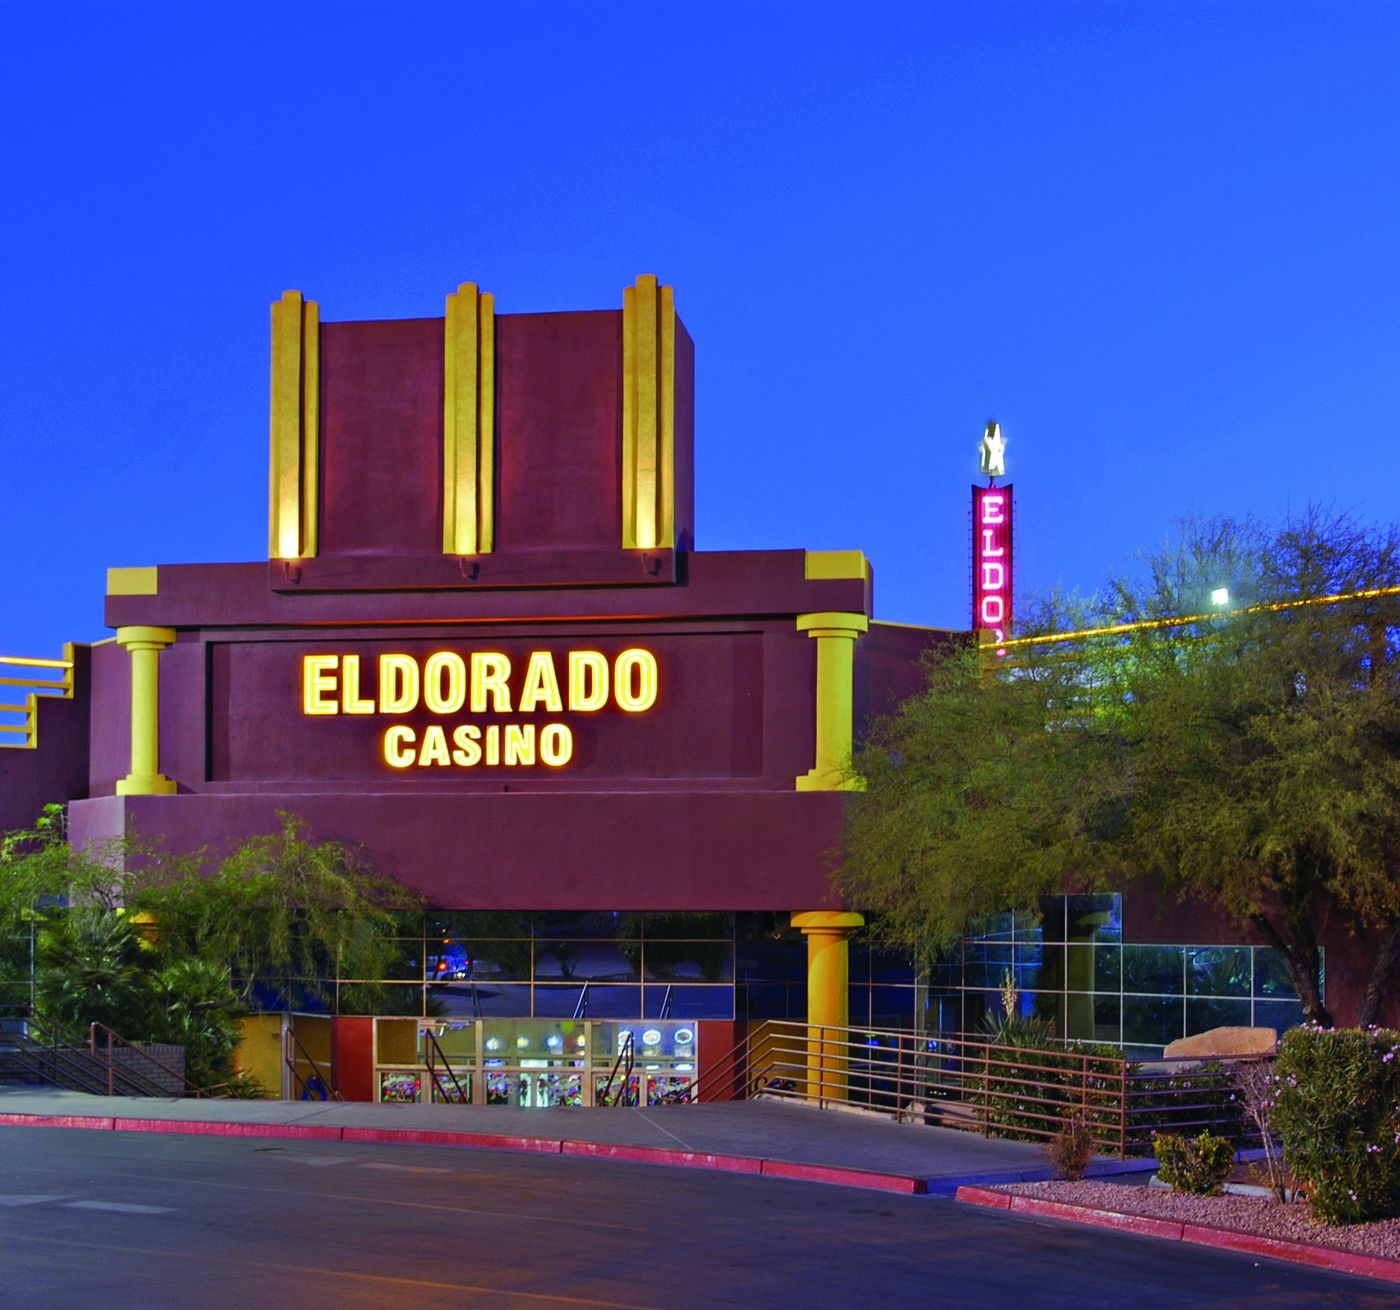 LEARN MORE AT THE REVIEW OF EL DORADO CASINO 3